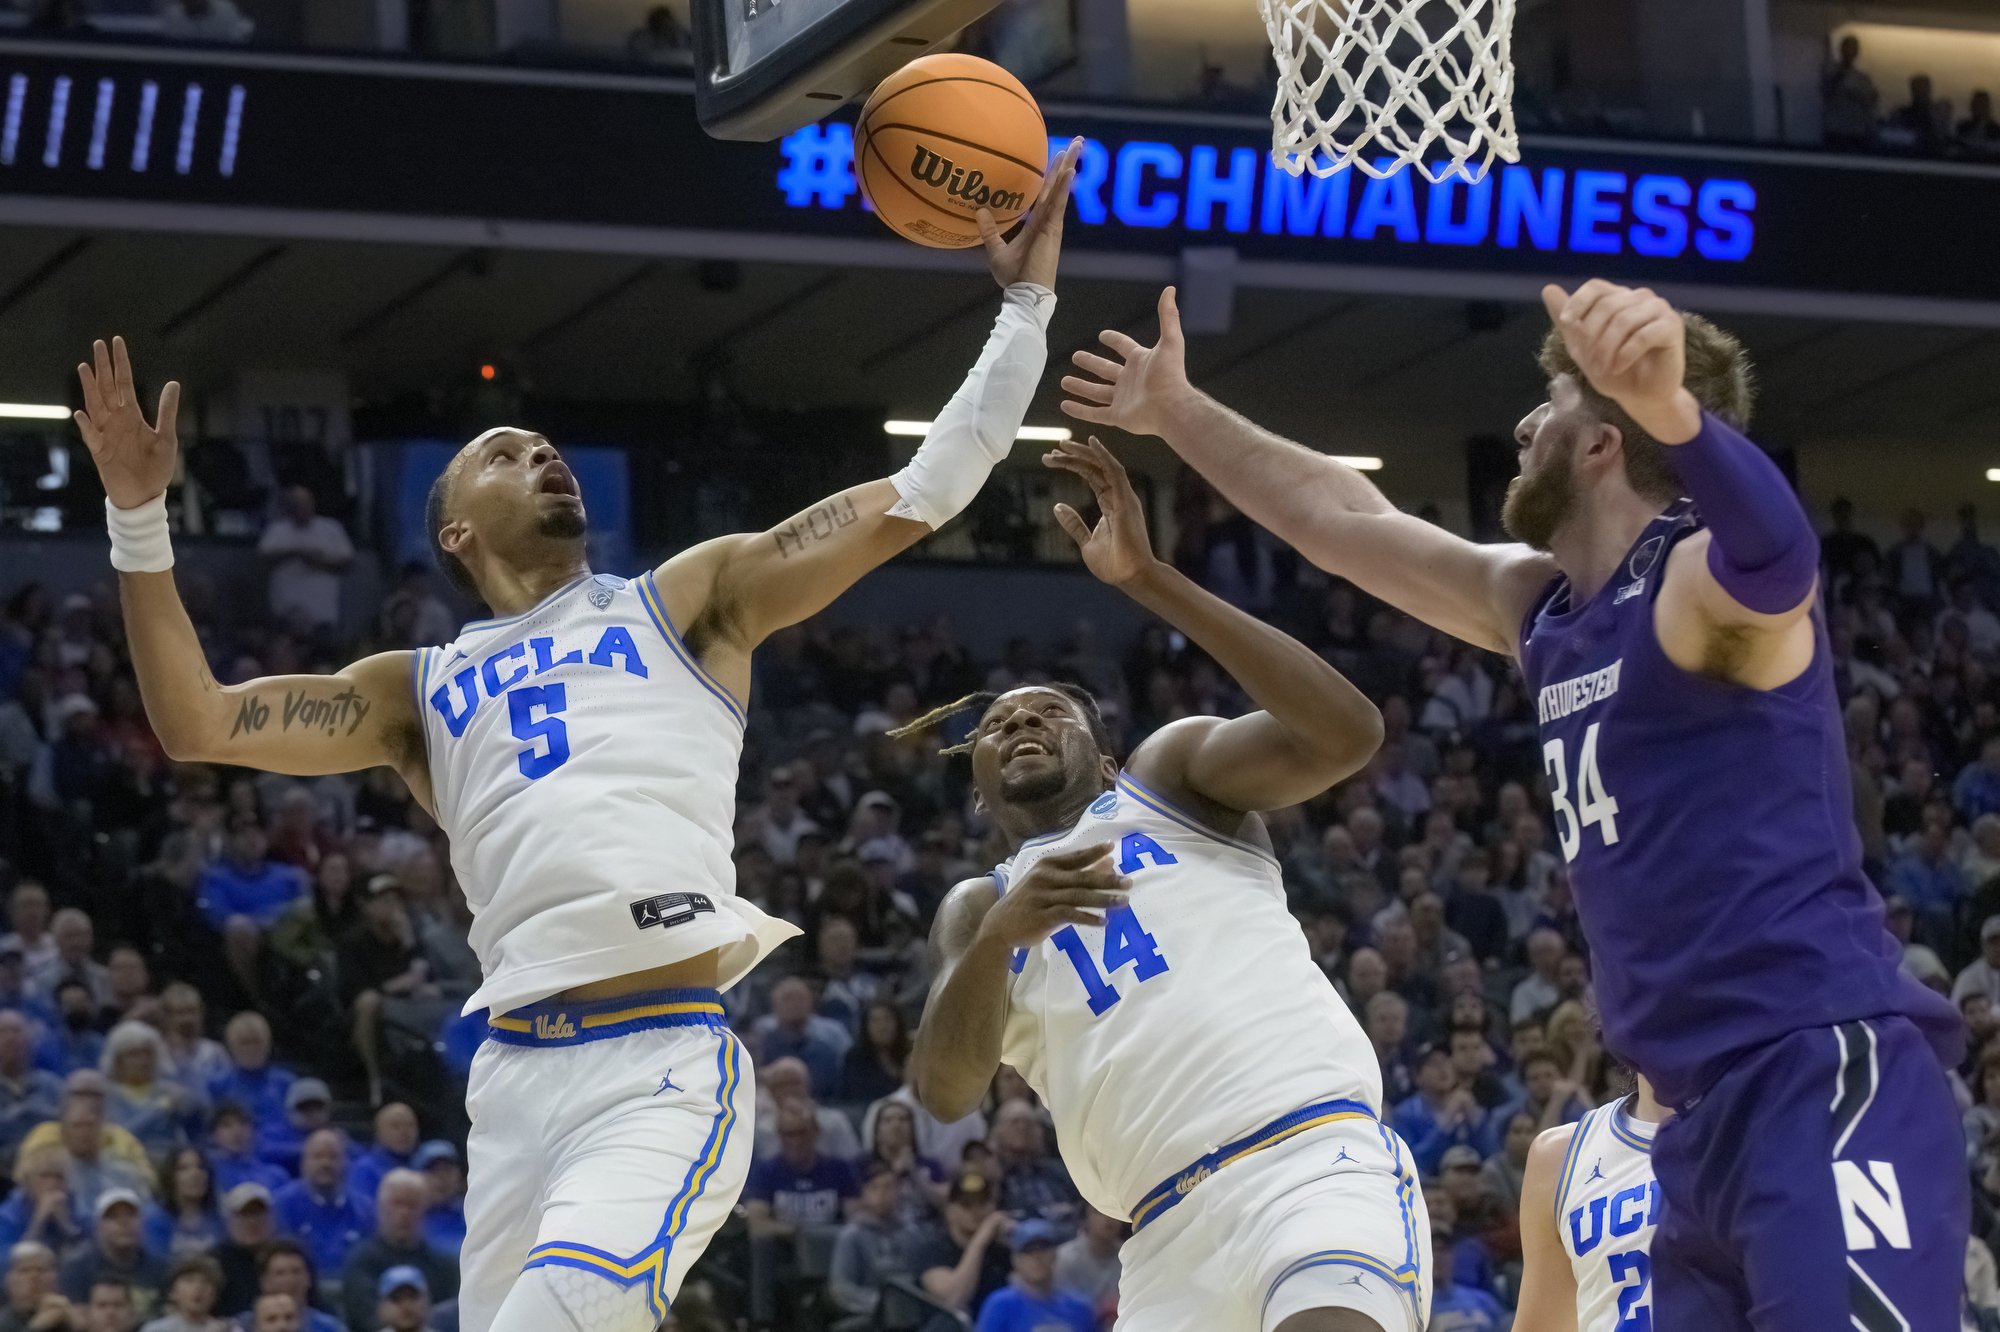  UCLA guard Amari Bailey (5) and forward Kenneth Nwuba (14) battle for a rebound with Northwestern center Matthew Nicholson during the first half of a second-round college basketball game in the NCAA Tournament in Sacramento, Calif., Saturday, March 